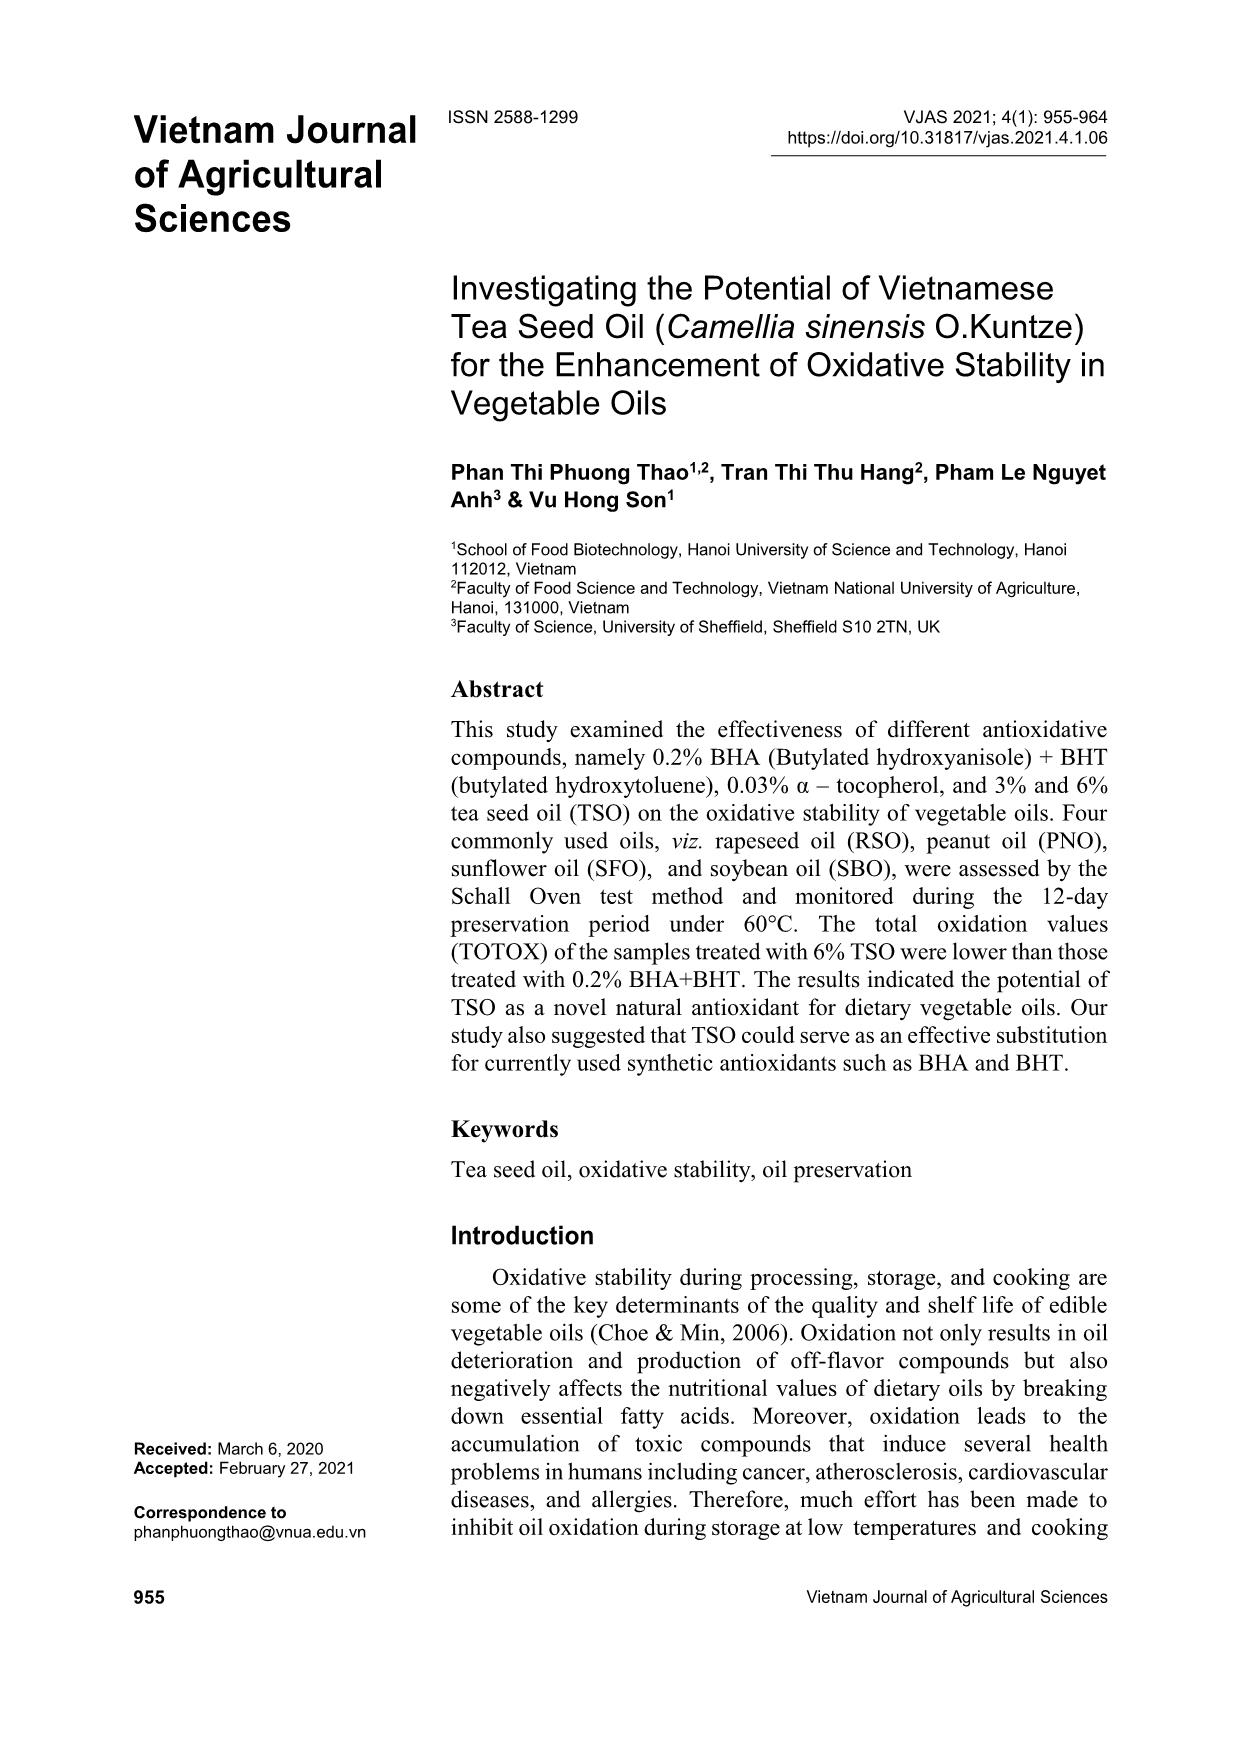 Investigating the potential of Vietnamese tea seed oil (Camellia sinensis O.Kuntze) for the enhancement of oxidative stability in vegetable oils trang 1